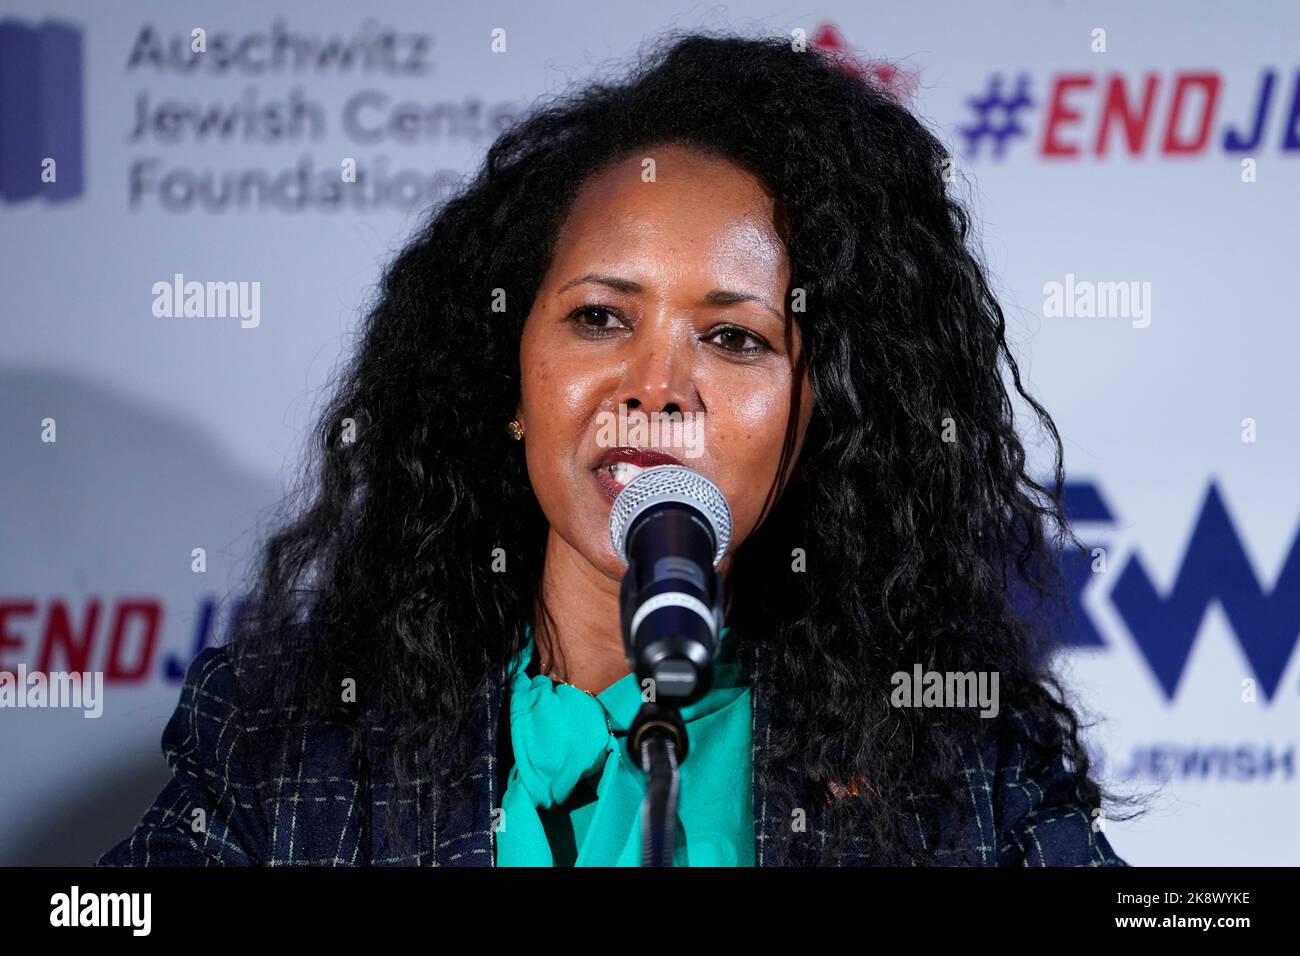 New York City, USA. 24th Oct, 2022. Mazi Pilip speaks during the #EndJewHatred Day event at the Center for Jewish History on October 24, 2022 in New York City. (Photo by John Lamparski/Sipa USA) Credit: Sipa USA/Alamy Live News Stock Photo